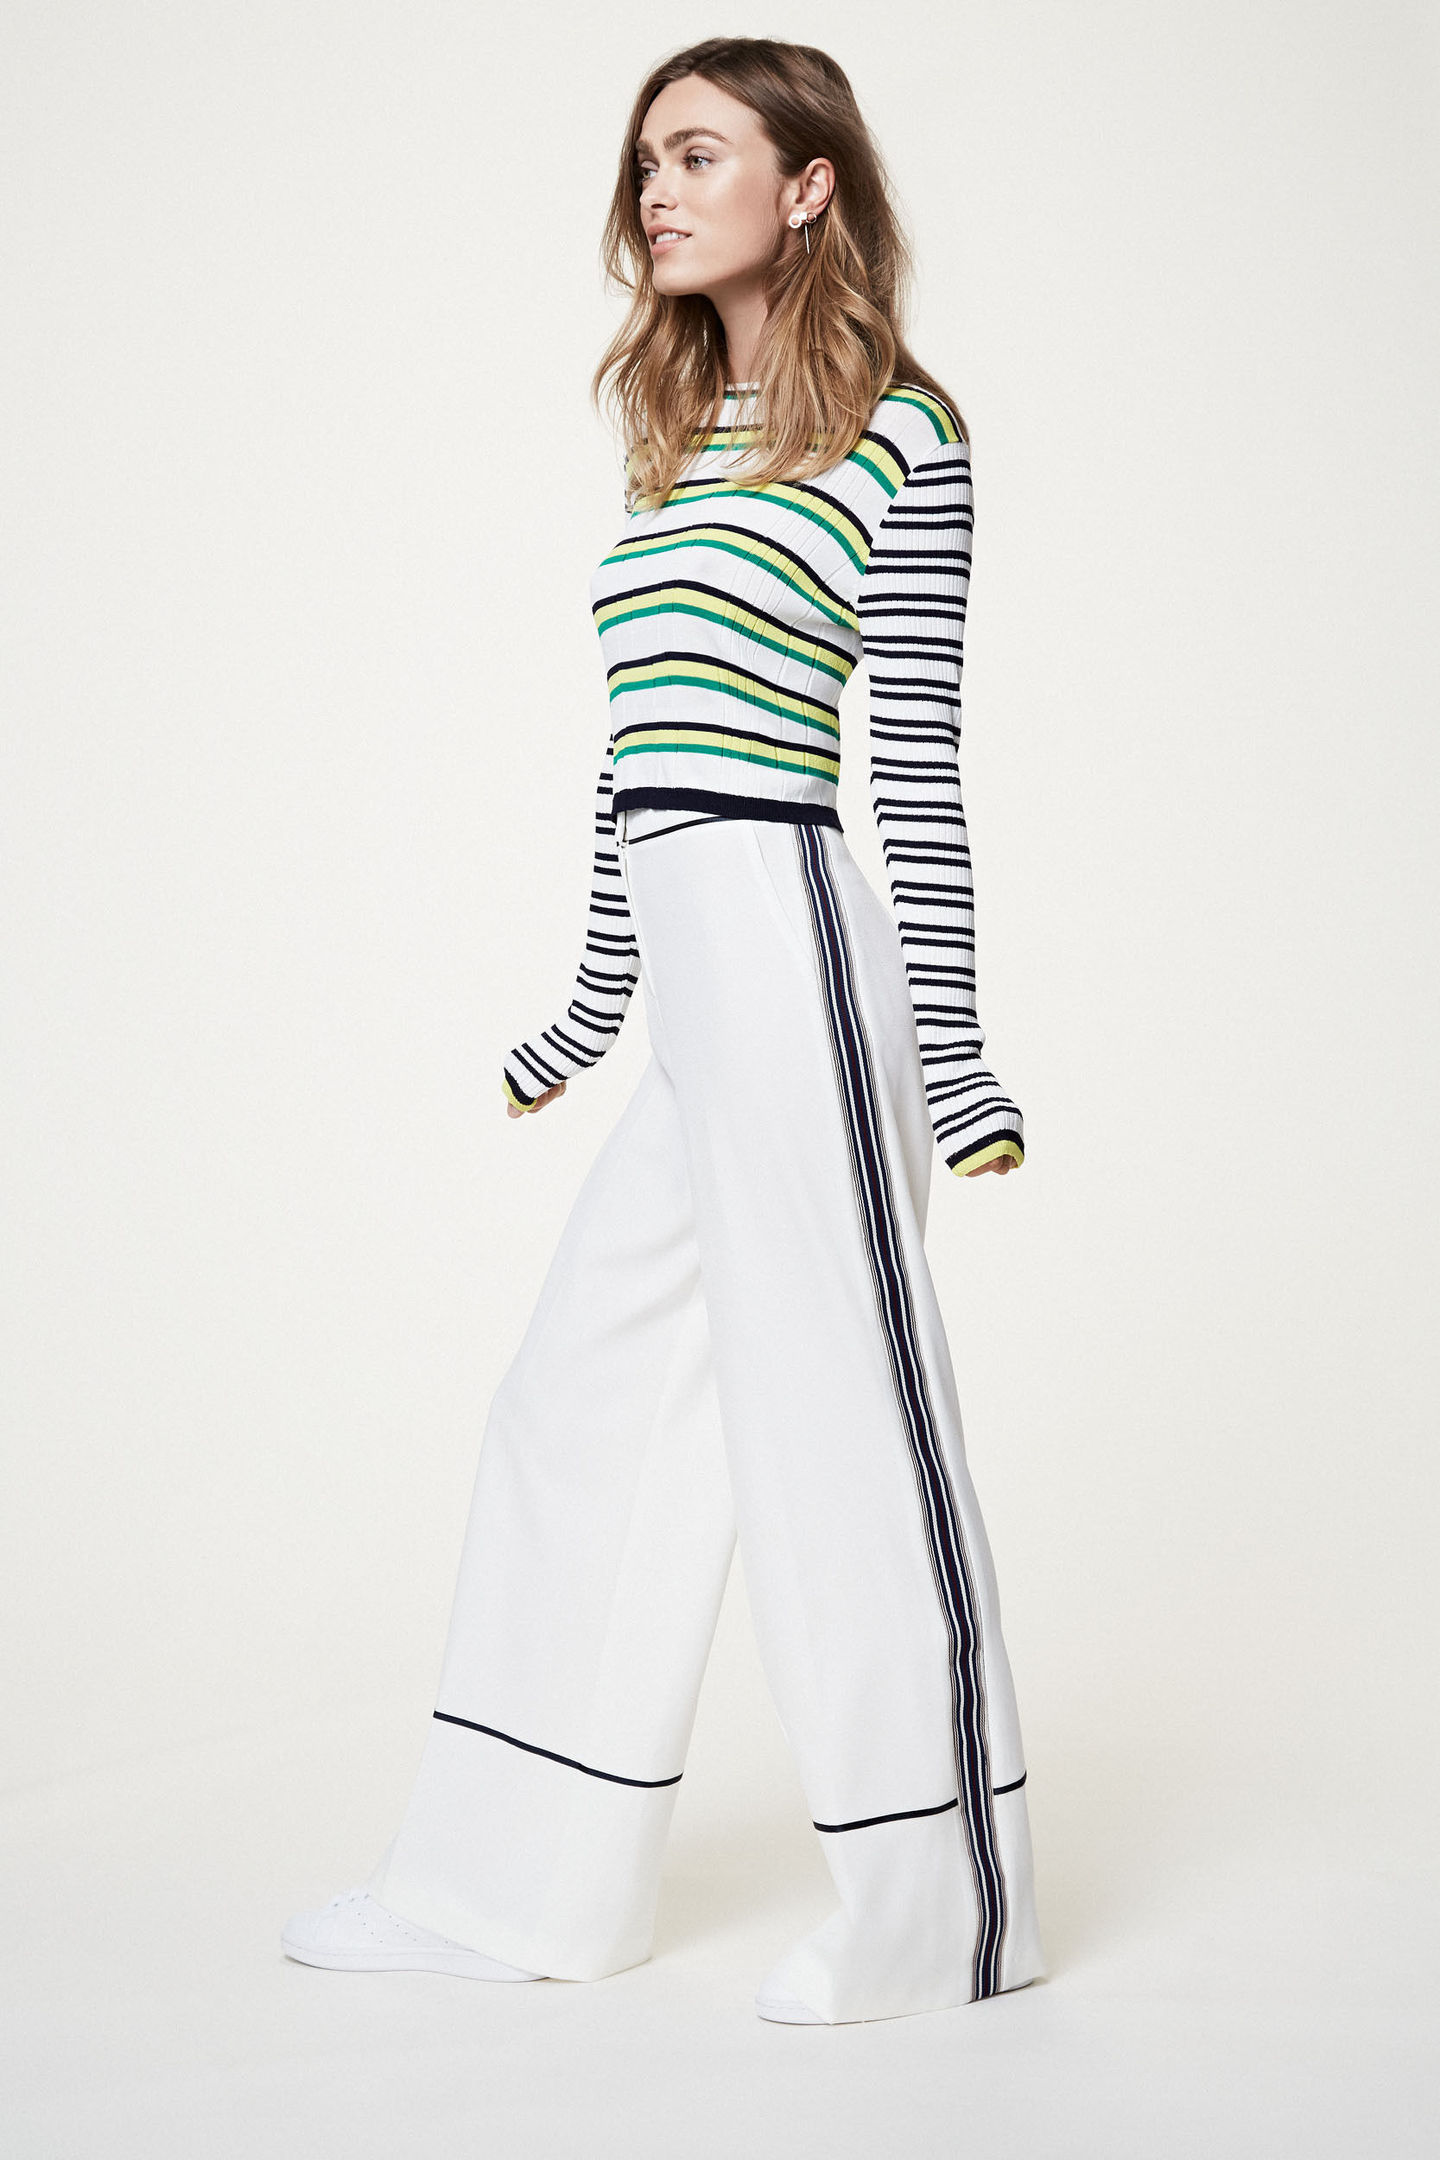 Undated Handout Photo of a model wearing the V by Very Crew Neck Contrast Stripe Jumper and stripe wide-leg trousers, available from very.co.uk. See PA Feature FASHION Stripes. Picture credit should read: PA Photo/Handout. WARNING: This picture must only be used to accompany PA Feature FASHION Stripes. WARNING: This picture must only be used with the full product information as stated above.